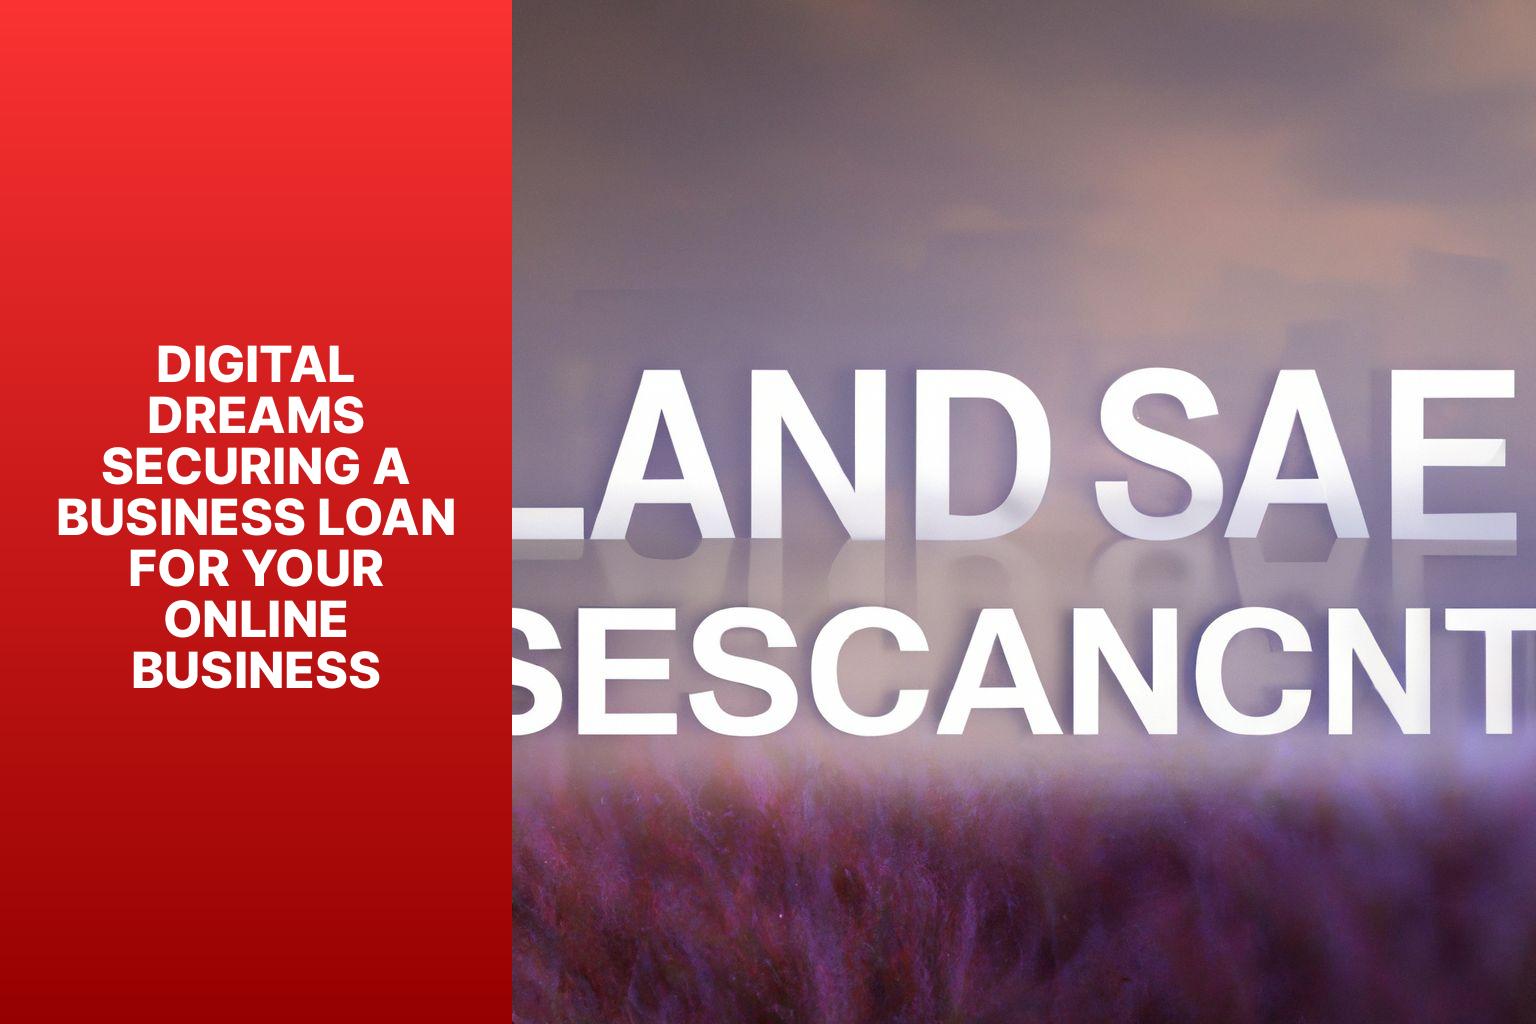 Digital Dreams Securing a Business Loan for Your Online Business